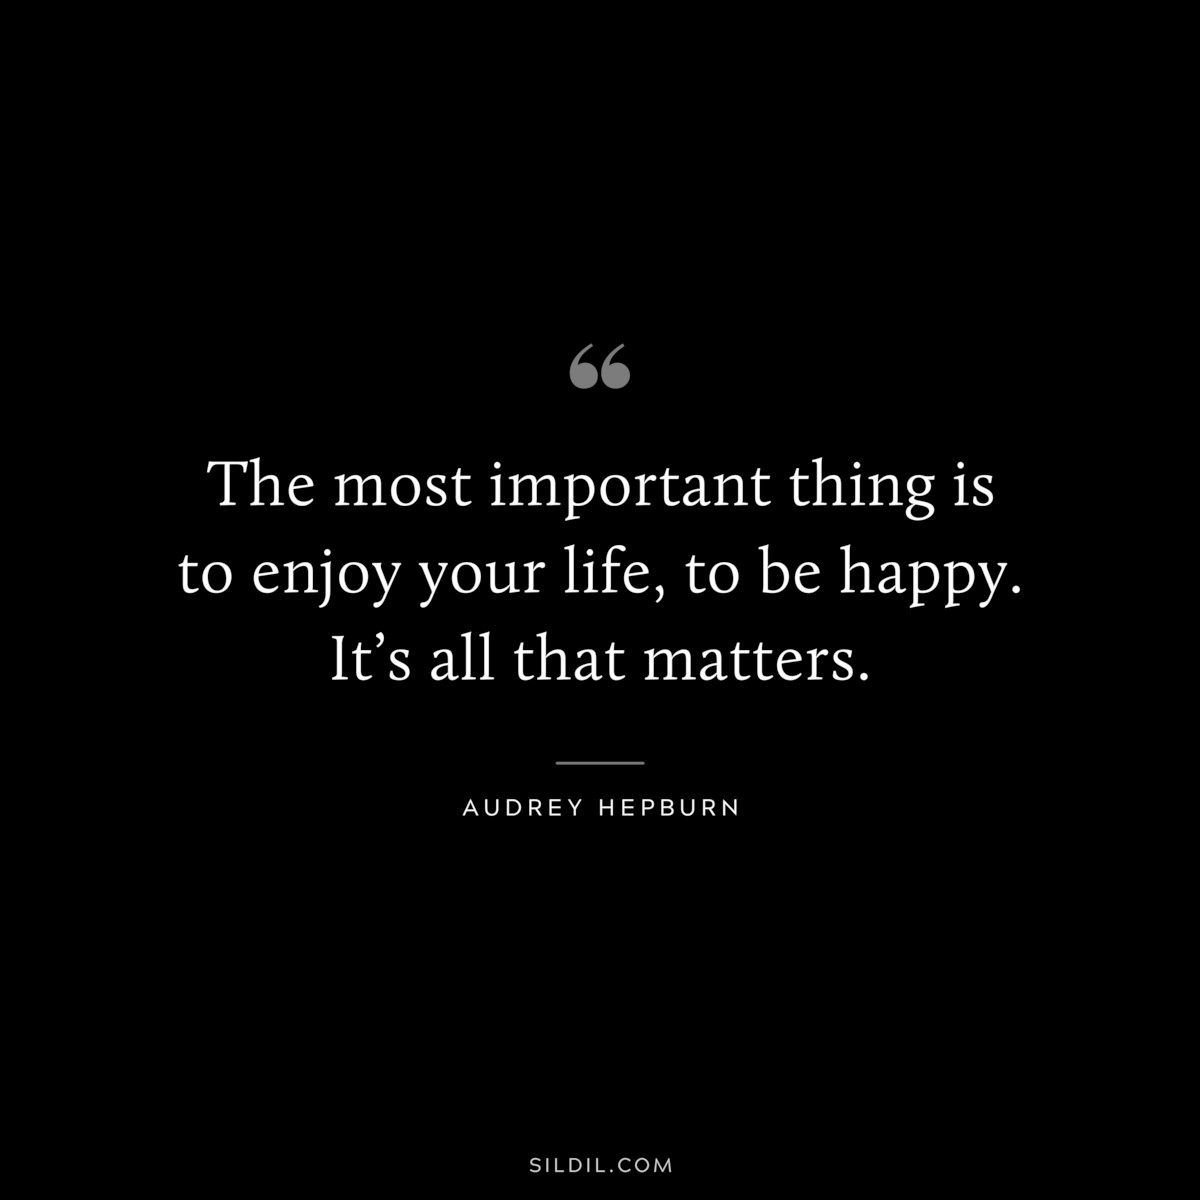 The most important thing is to enjoy your life, to be happy. It’s all that matters. ― Audrey Hepburn